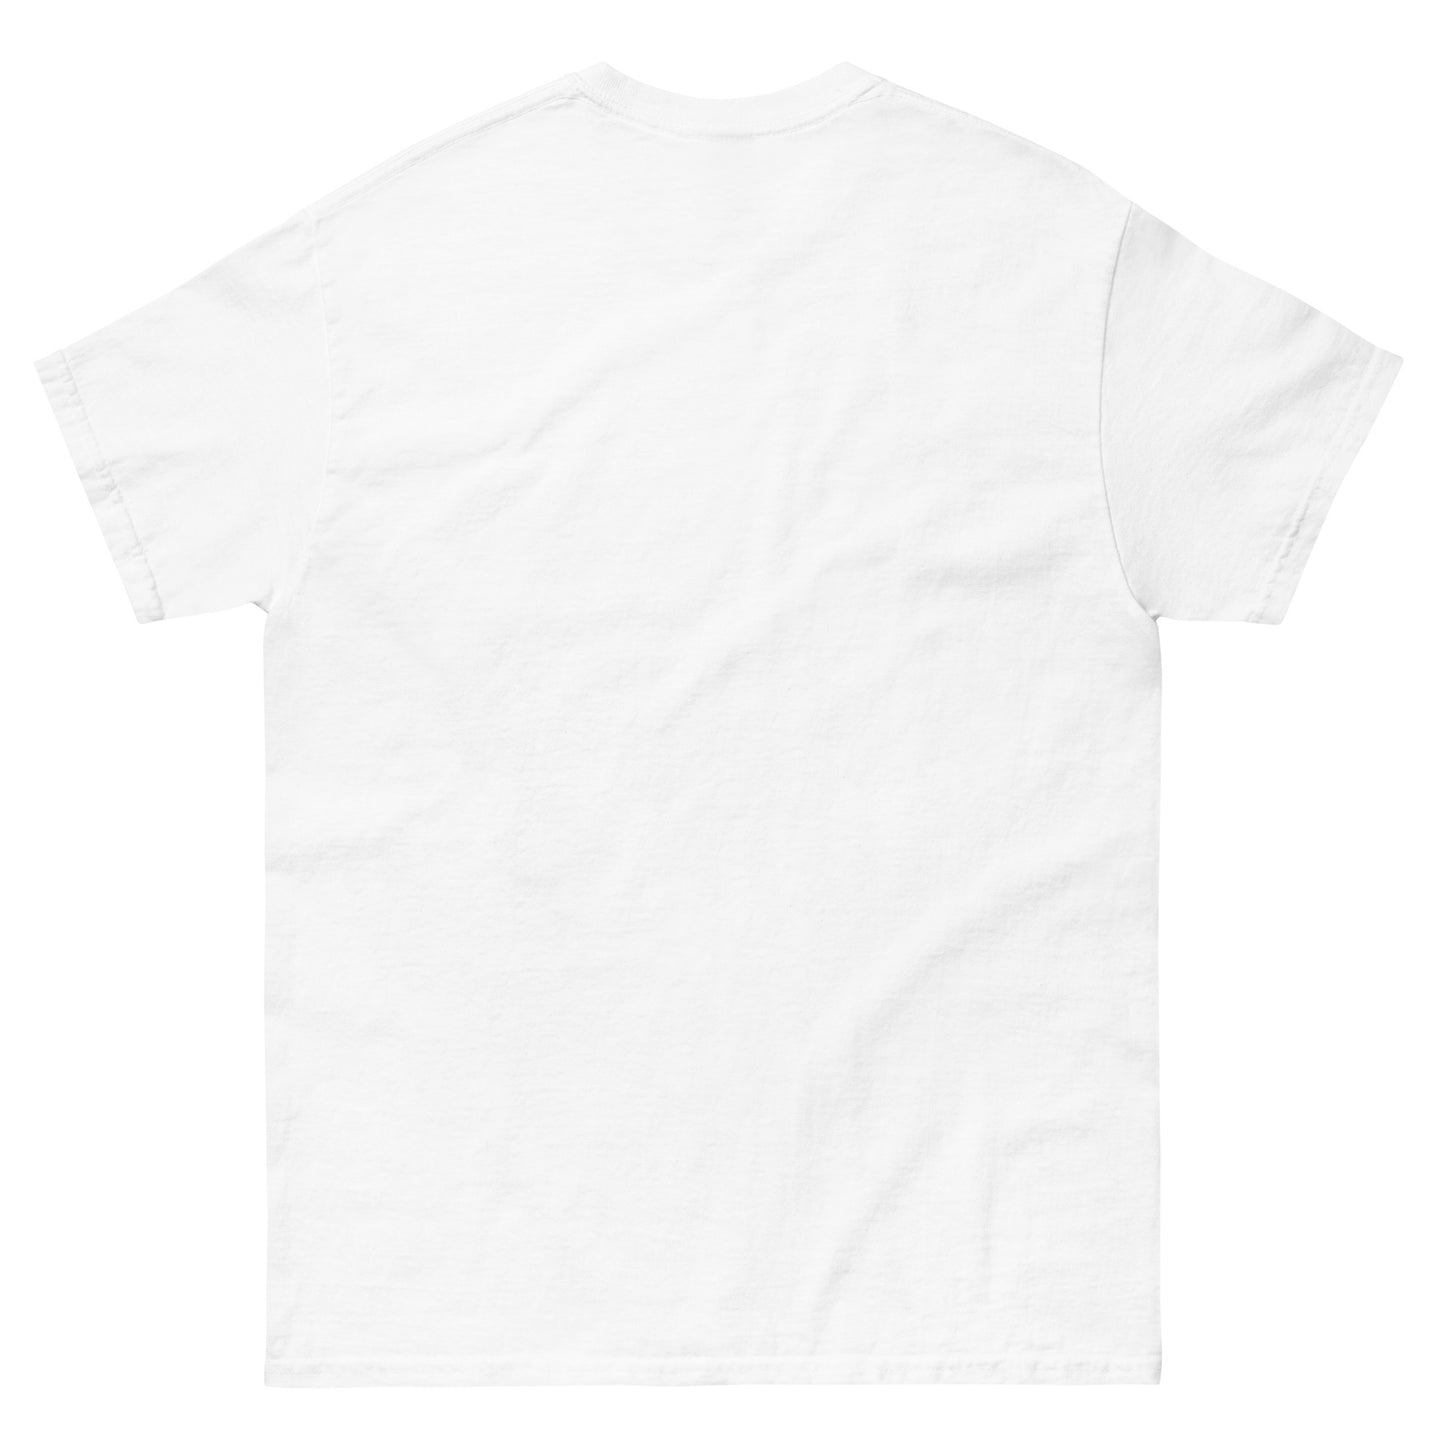 Uncle Ted Shirt